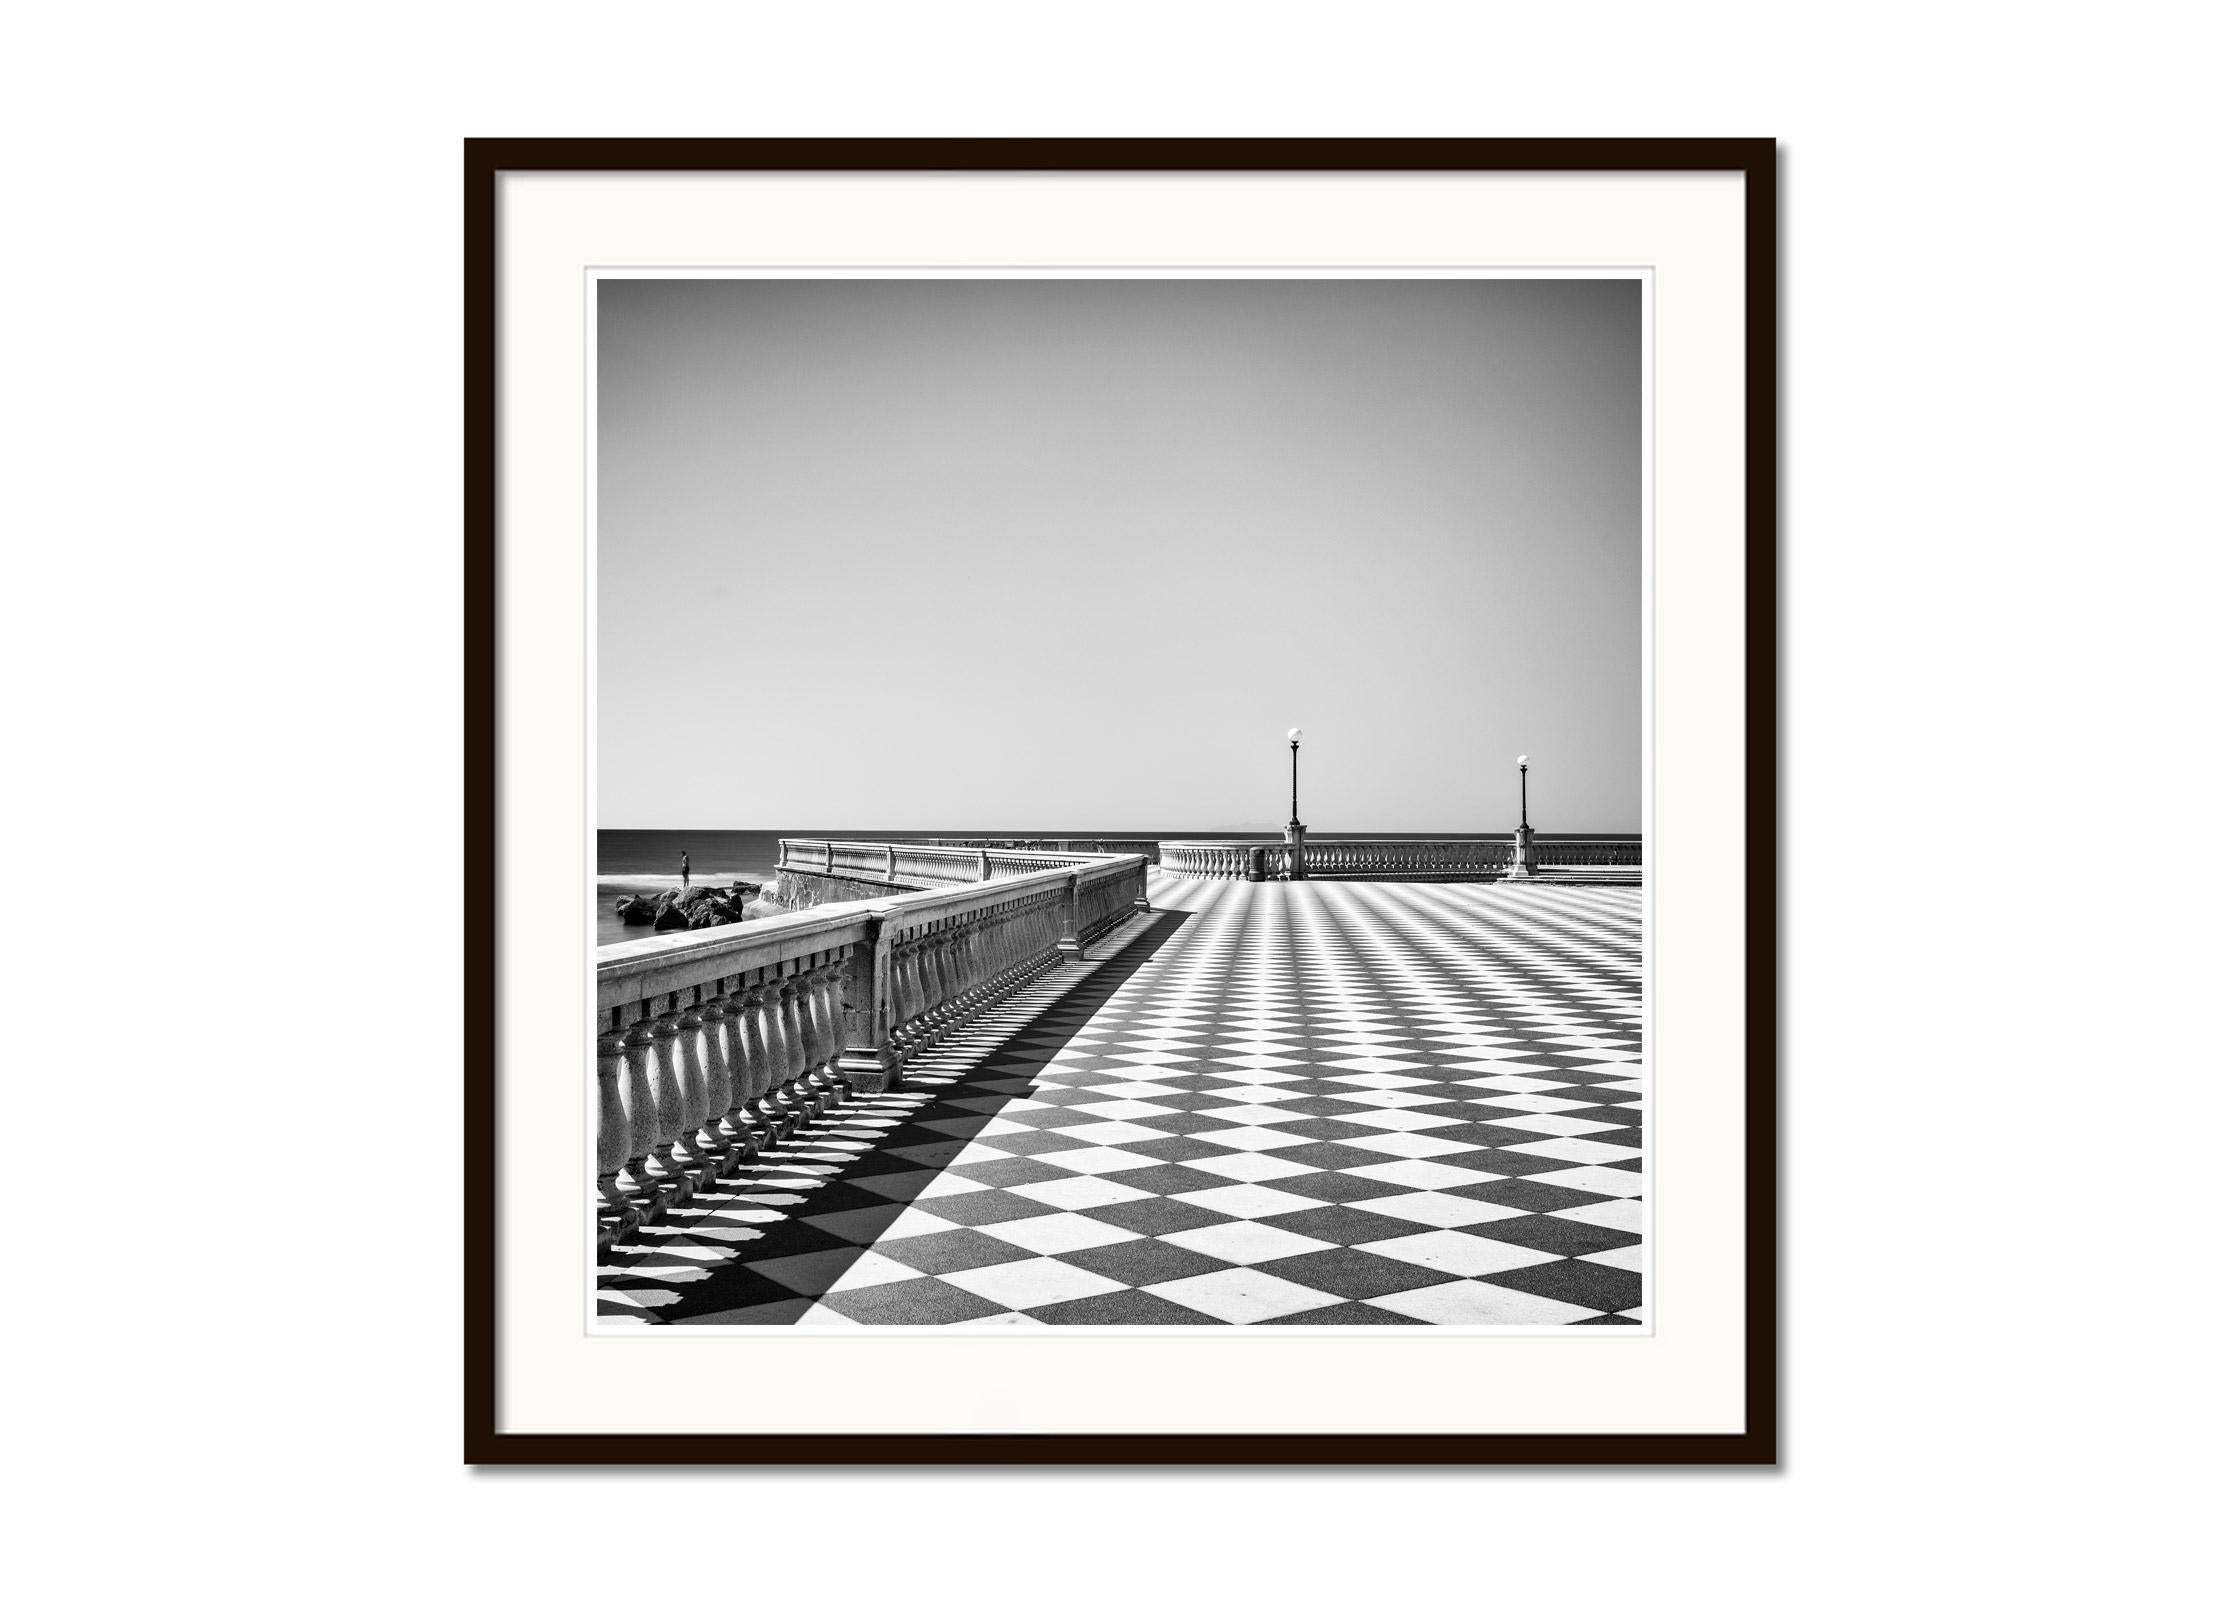 Terrazza Mascagni, Architecture, Tuscany, black and white photography, landscape - Gray Landscape Photograph by Gerald Berghammer